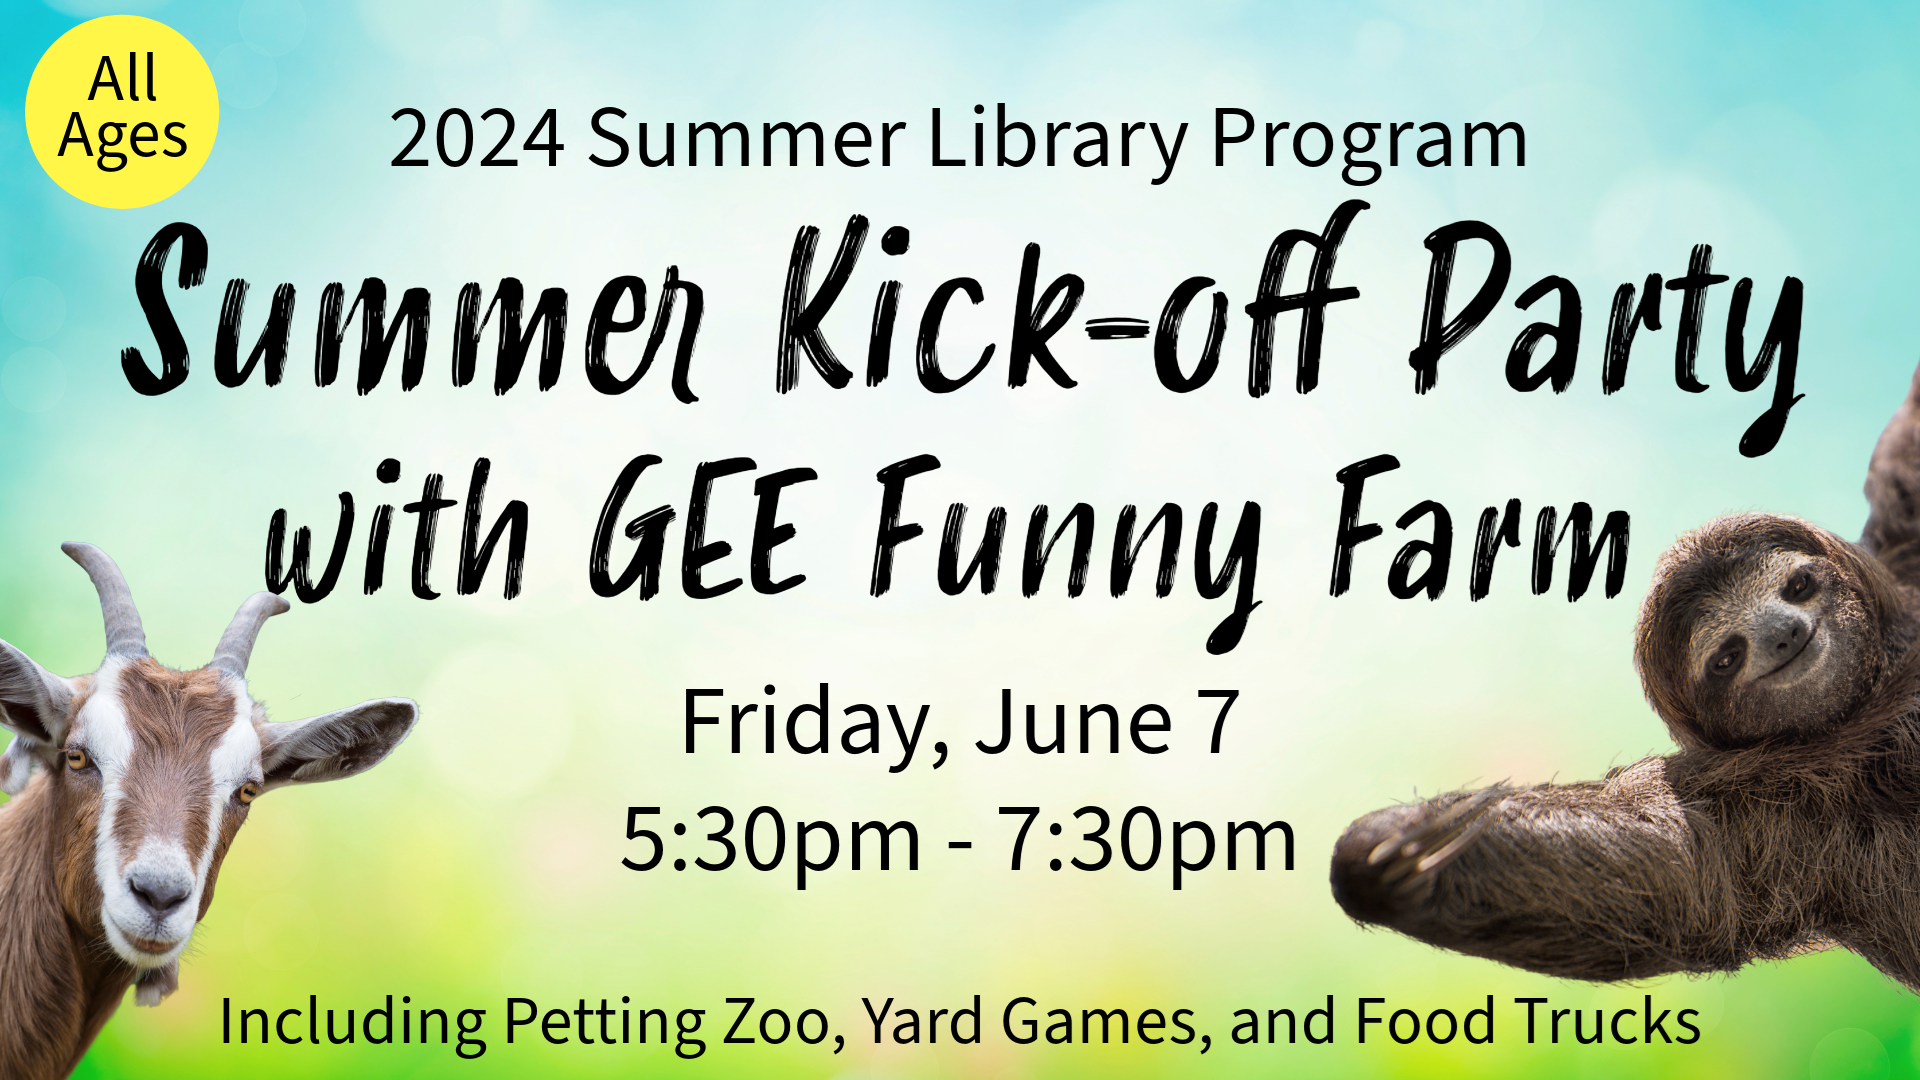 2024 Summer Library Program Summer Kick-off Party with GEE Funny Farm. Friday, June 7, 5:30pm - 7:30pm. Including Petting Zoo, Yard Games, and Food Trucks. All Ages.